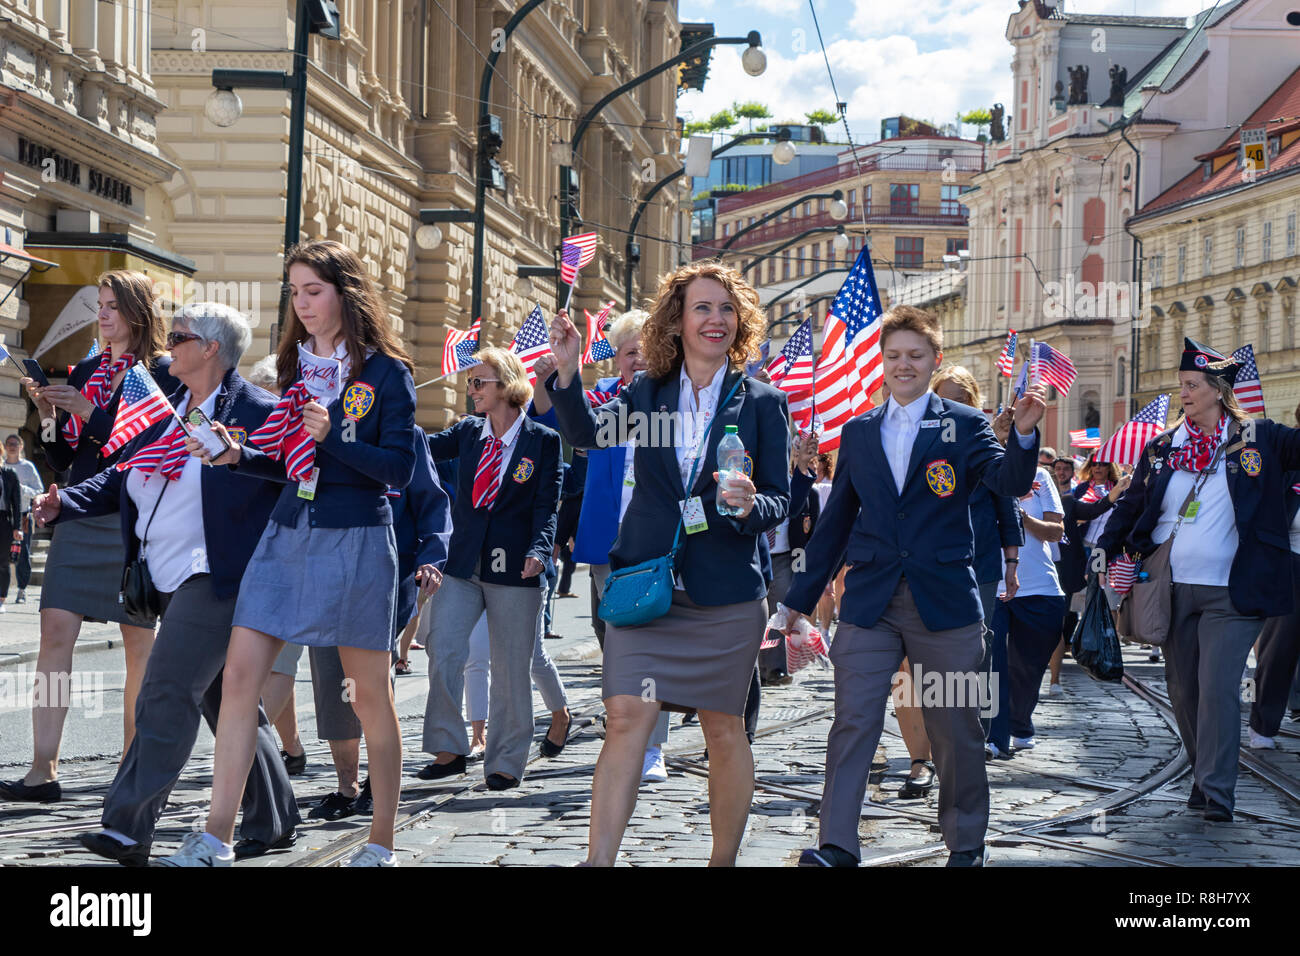 PRAGUE, CZECH REPUBLIC - JULY 1, 2018: American visitors parading at Sokolsky Slet, a once-every-six-years gathering of the Sokol movement - a Czech s Stock Photo